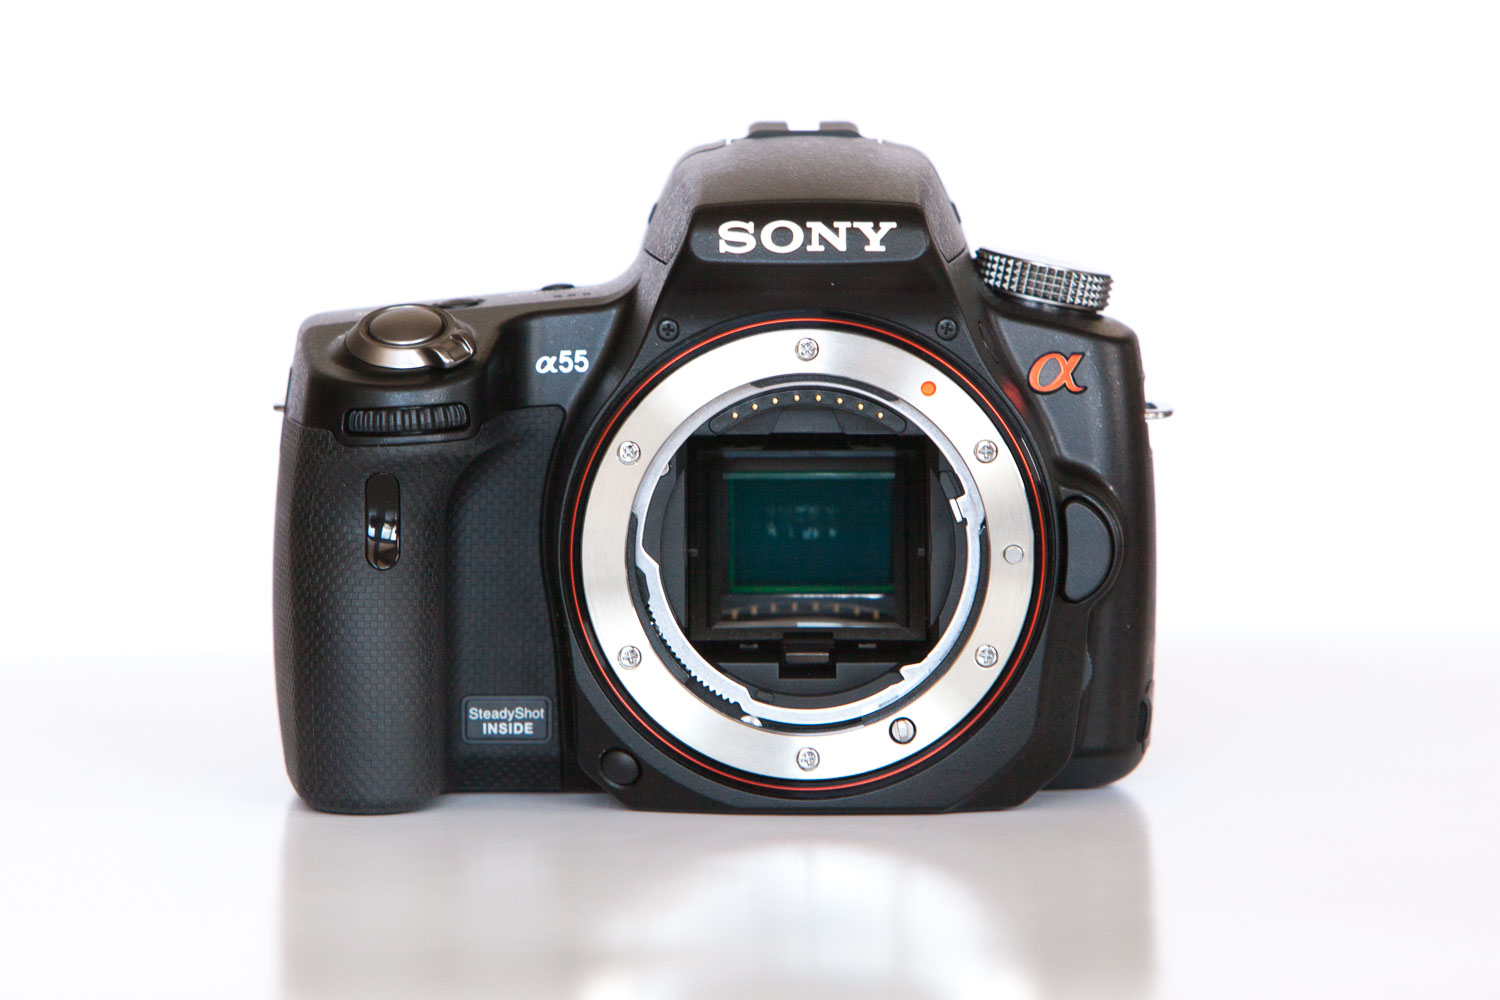 My Sony A55 DSLR Review | Hands On & Real World â€“ SonyAlphaLab